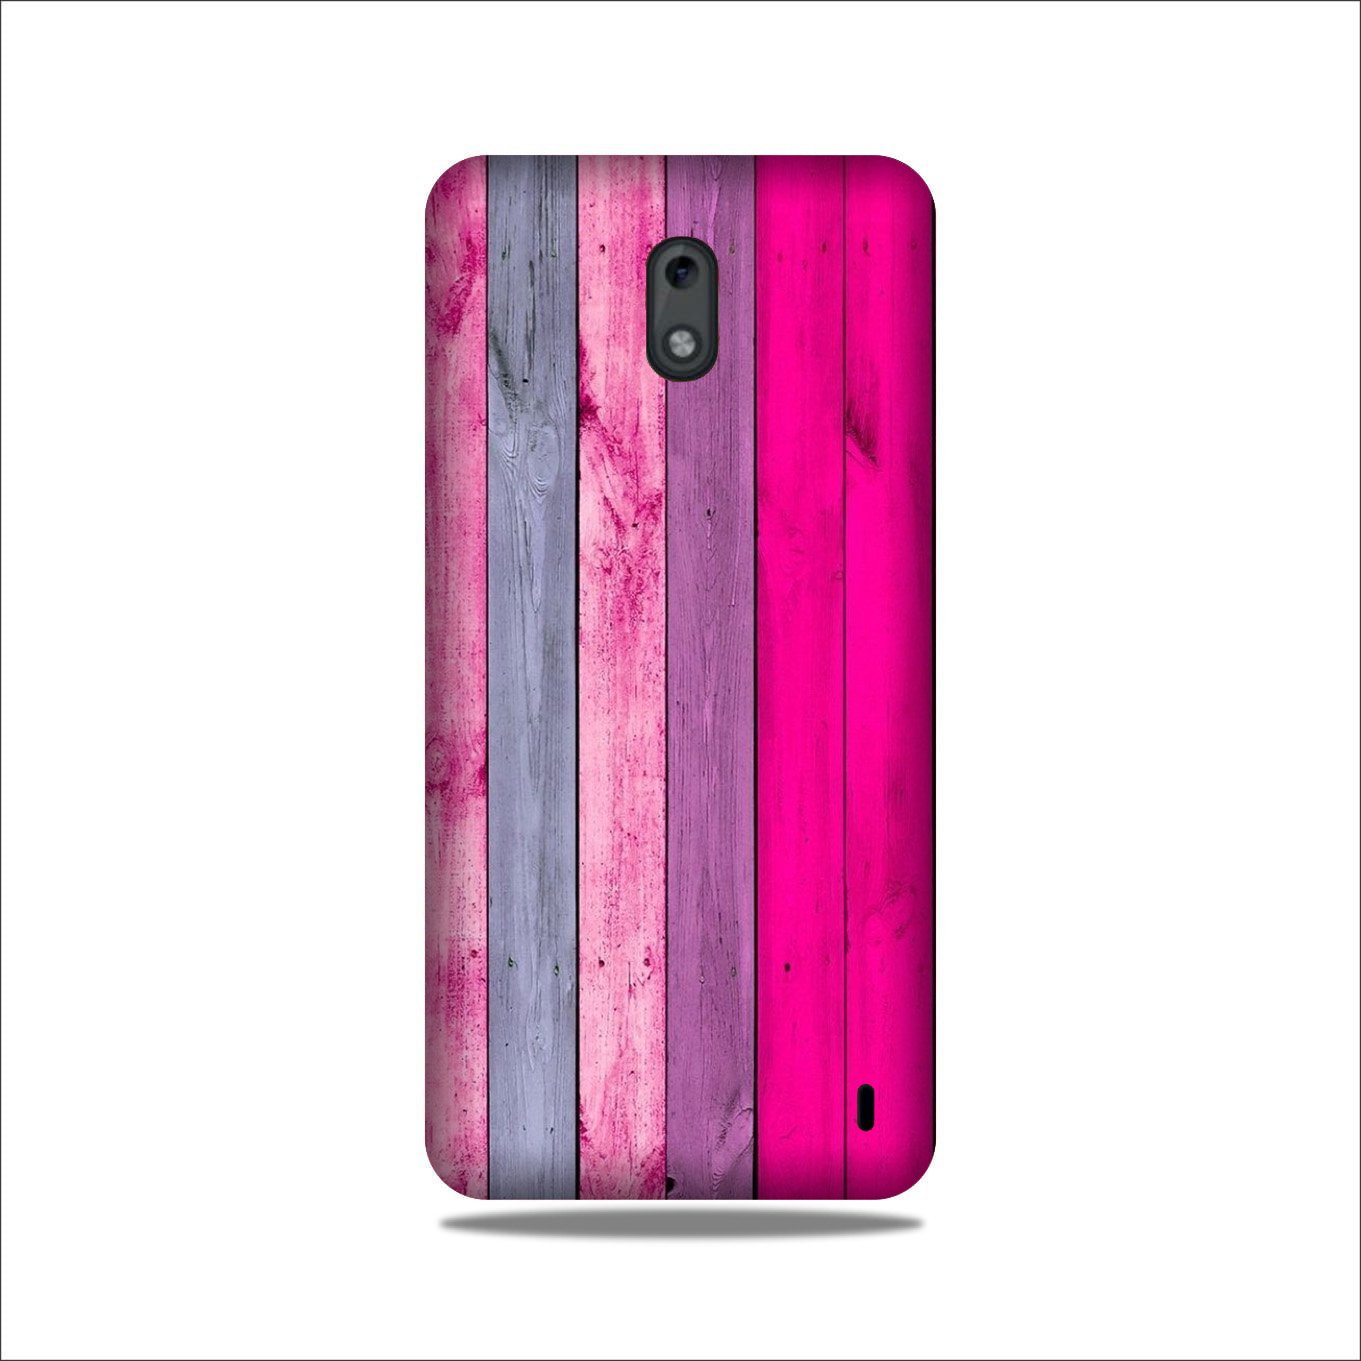 Wooden look Case for Nokia 2